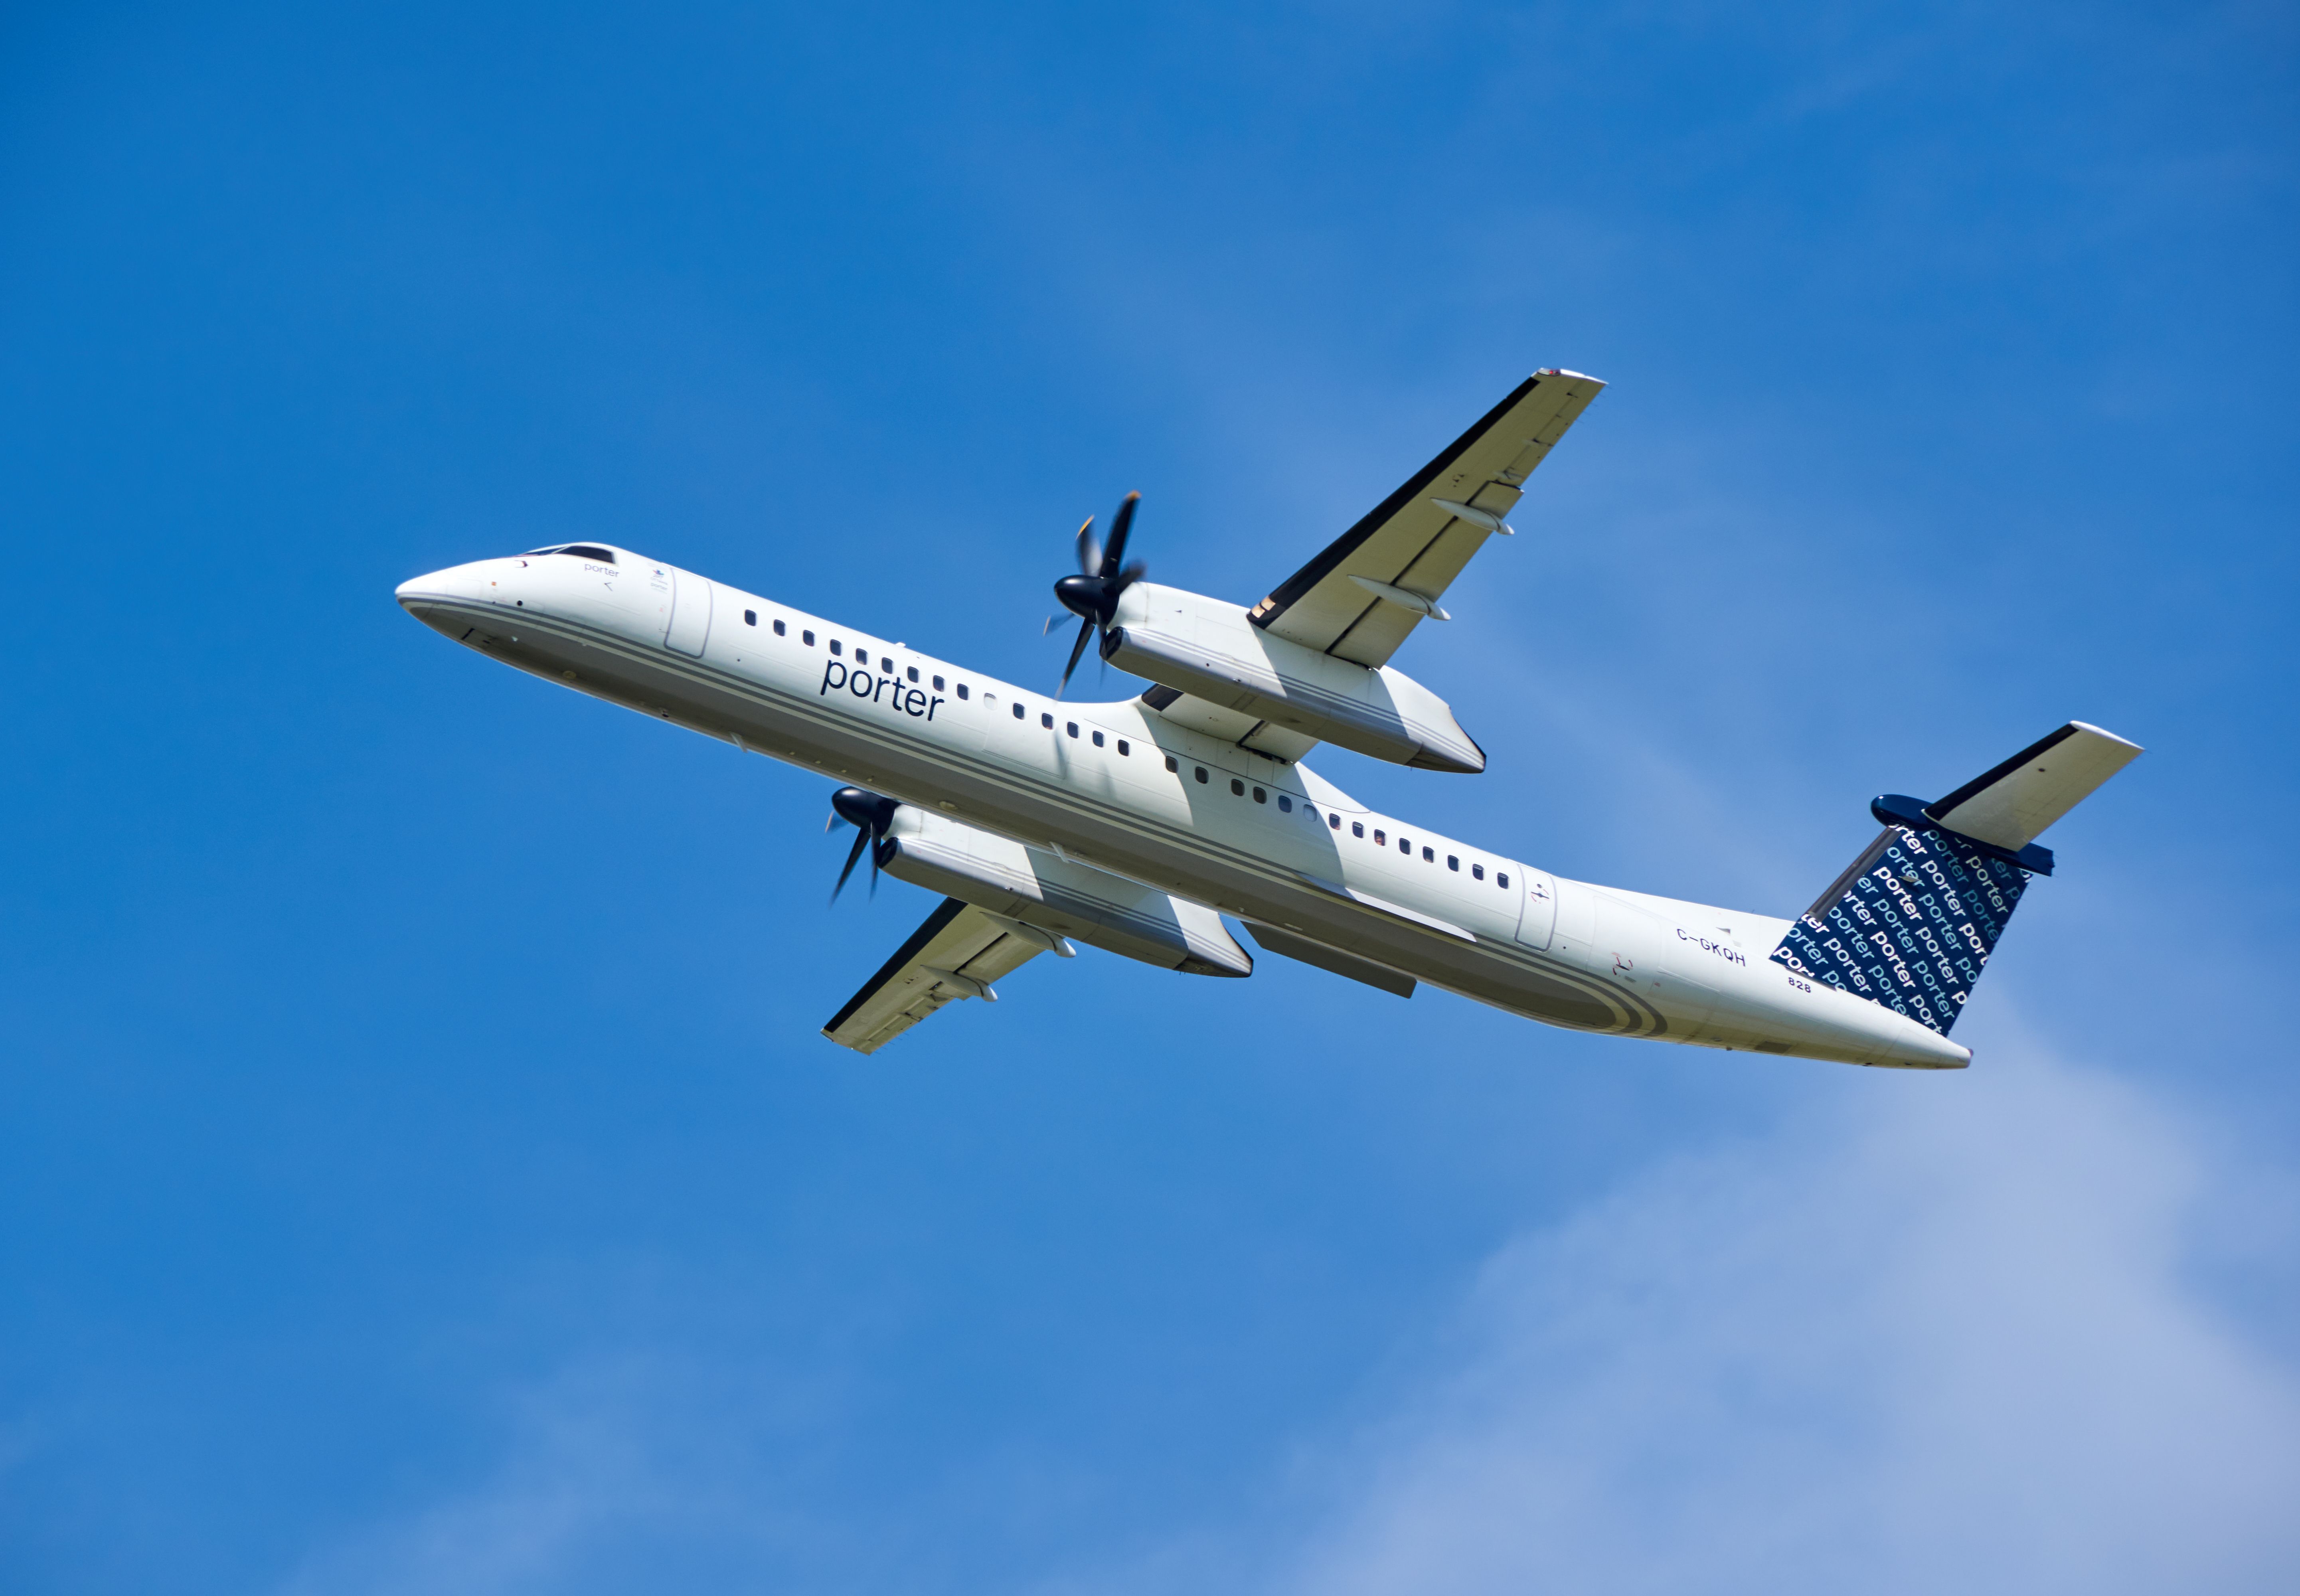 A Porter Airlines Dash 8-Q400 flying below the clouds.